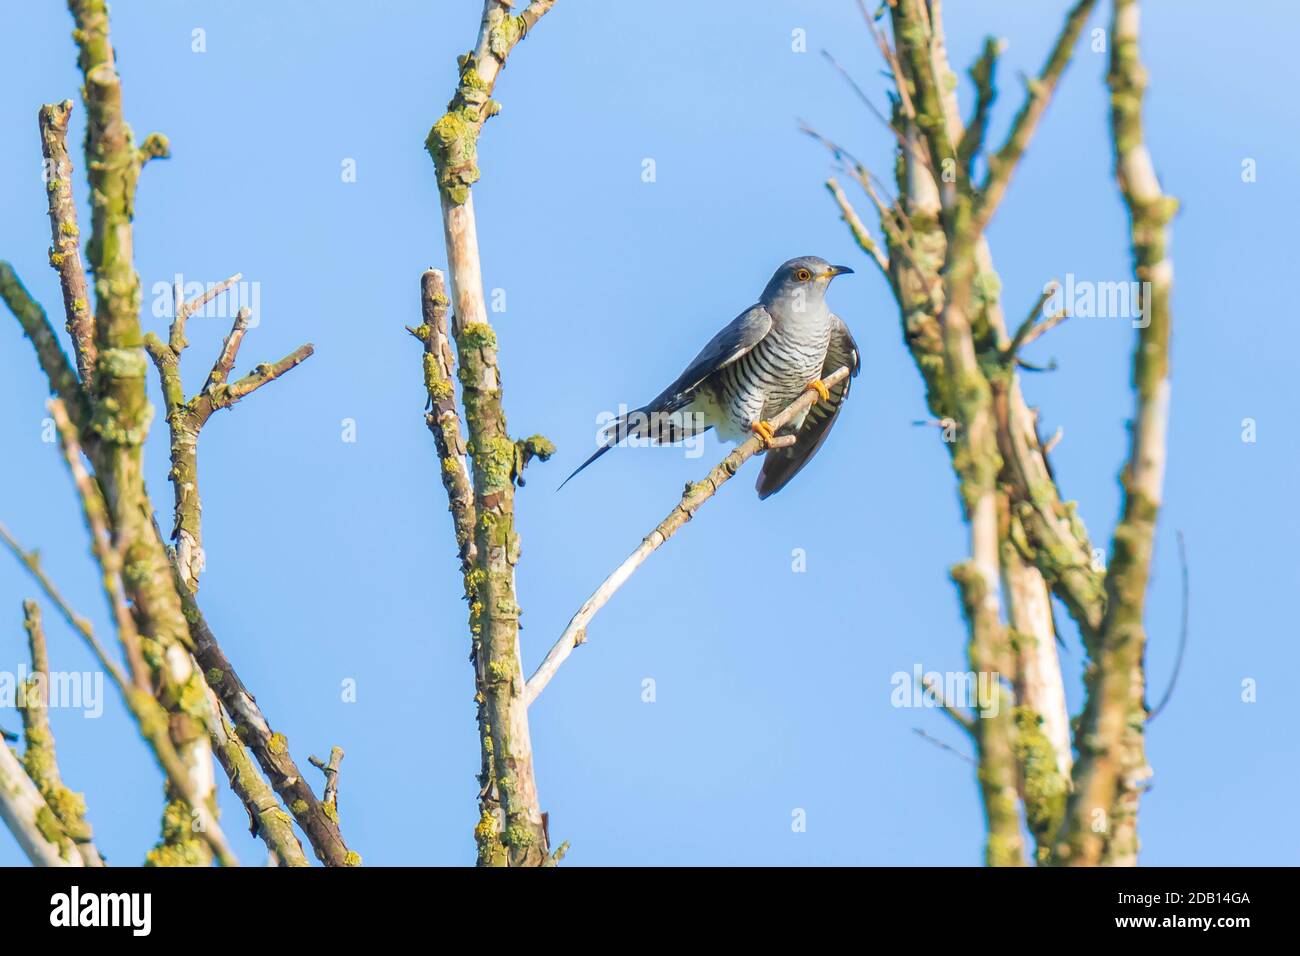 Common cuckoo, Cuculus canorus, resting and singing in a tree. It is a brood parasite, which means it lays eggs in the nests of other bird species Stock Photo